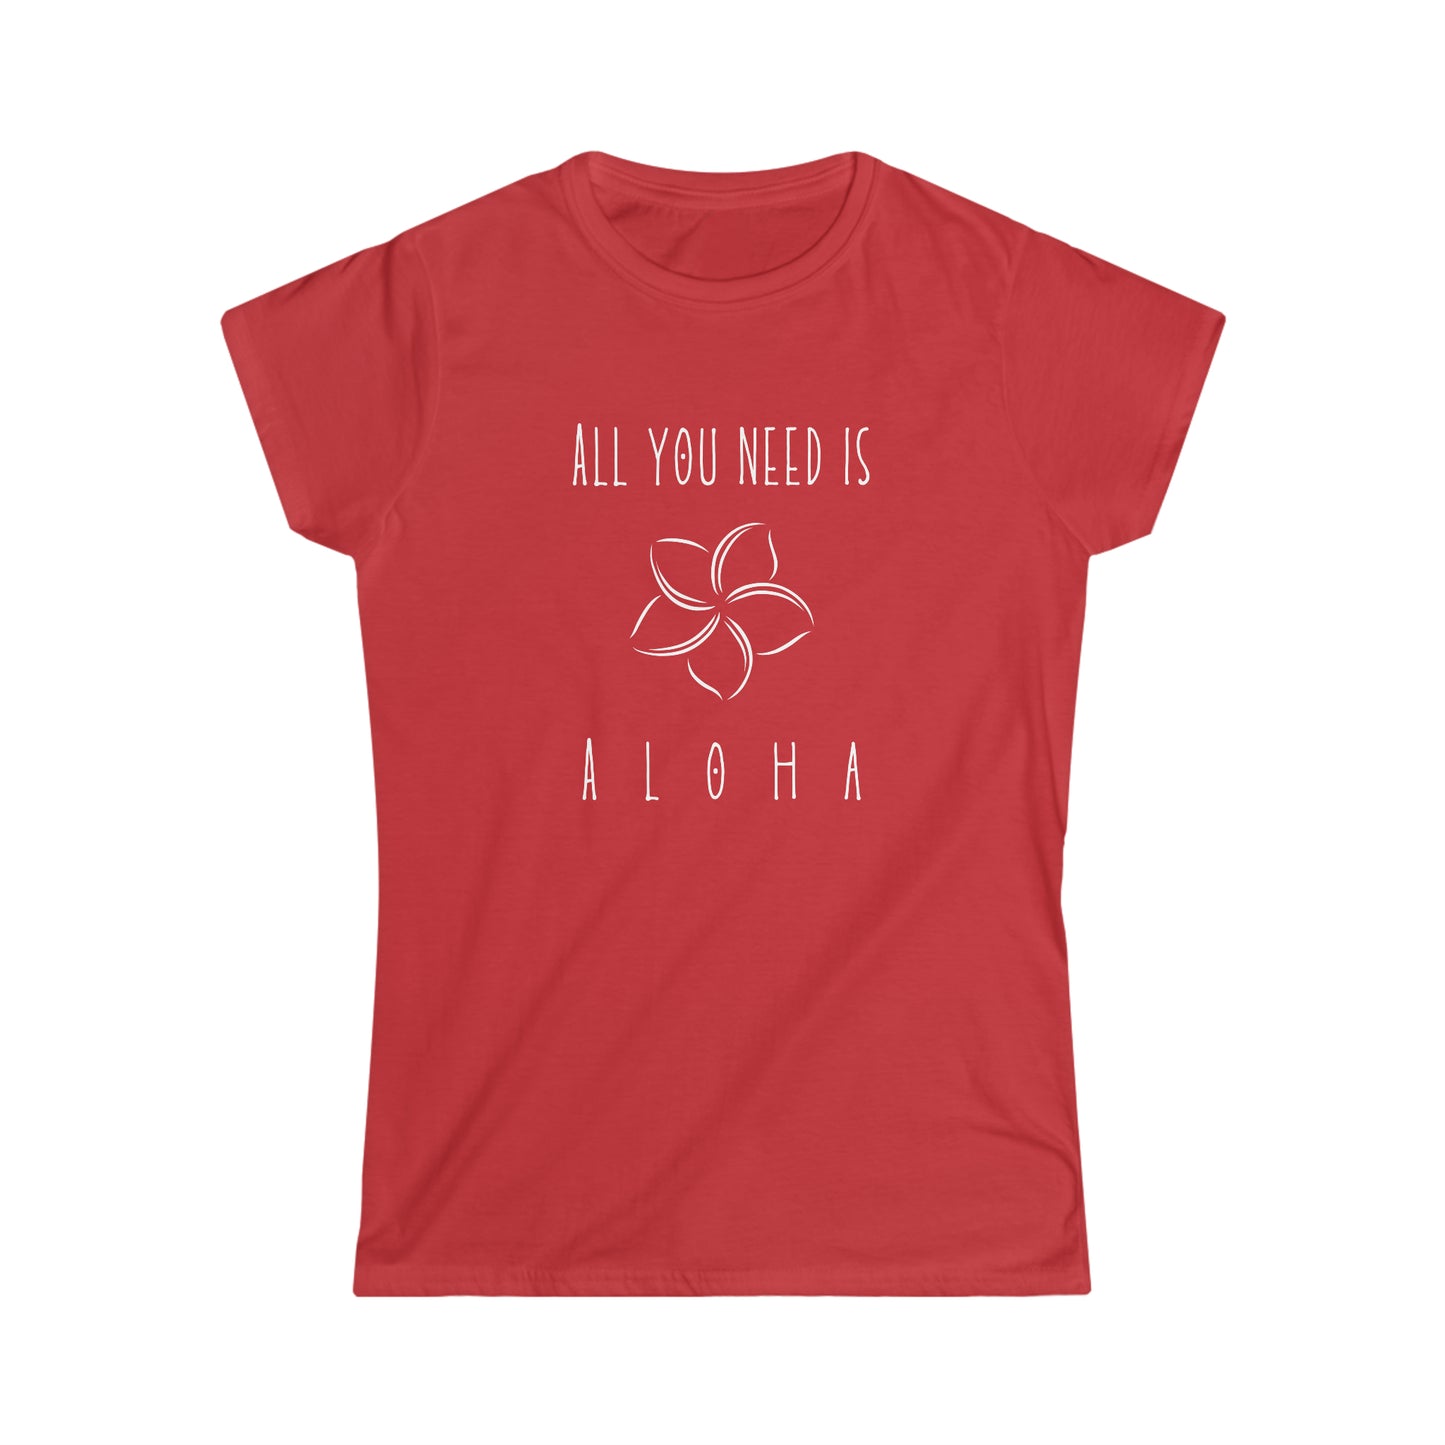 All You Need is Aloha White Print Women's Softstyle Tee in 5 colors